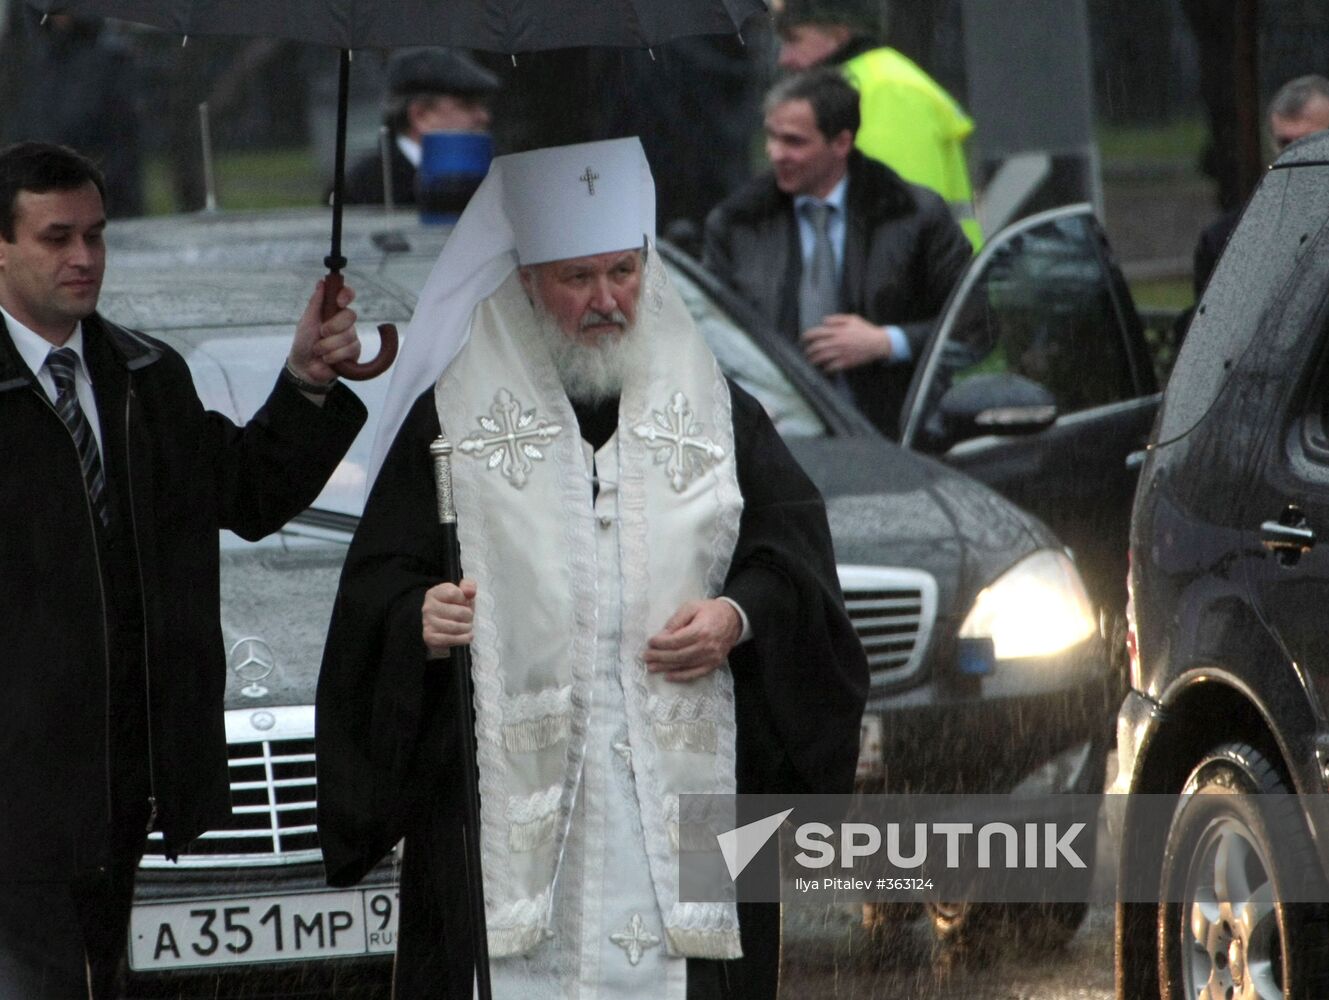 Funeral of Patriarch Alexy II of Moscow and All Russia